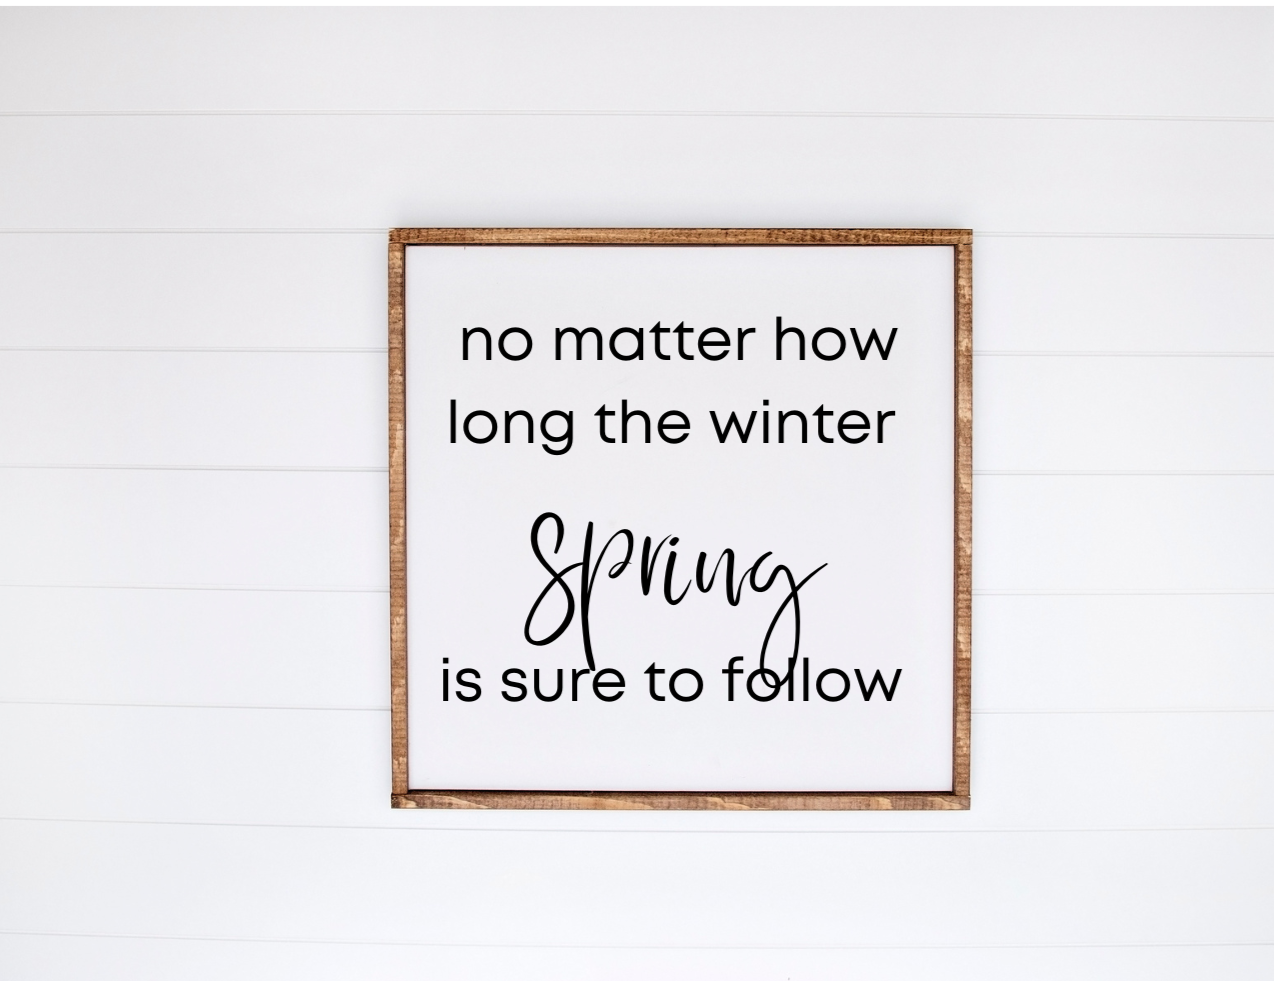 No matter how long the winter, Spring is sure to follow  framed sign 